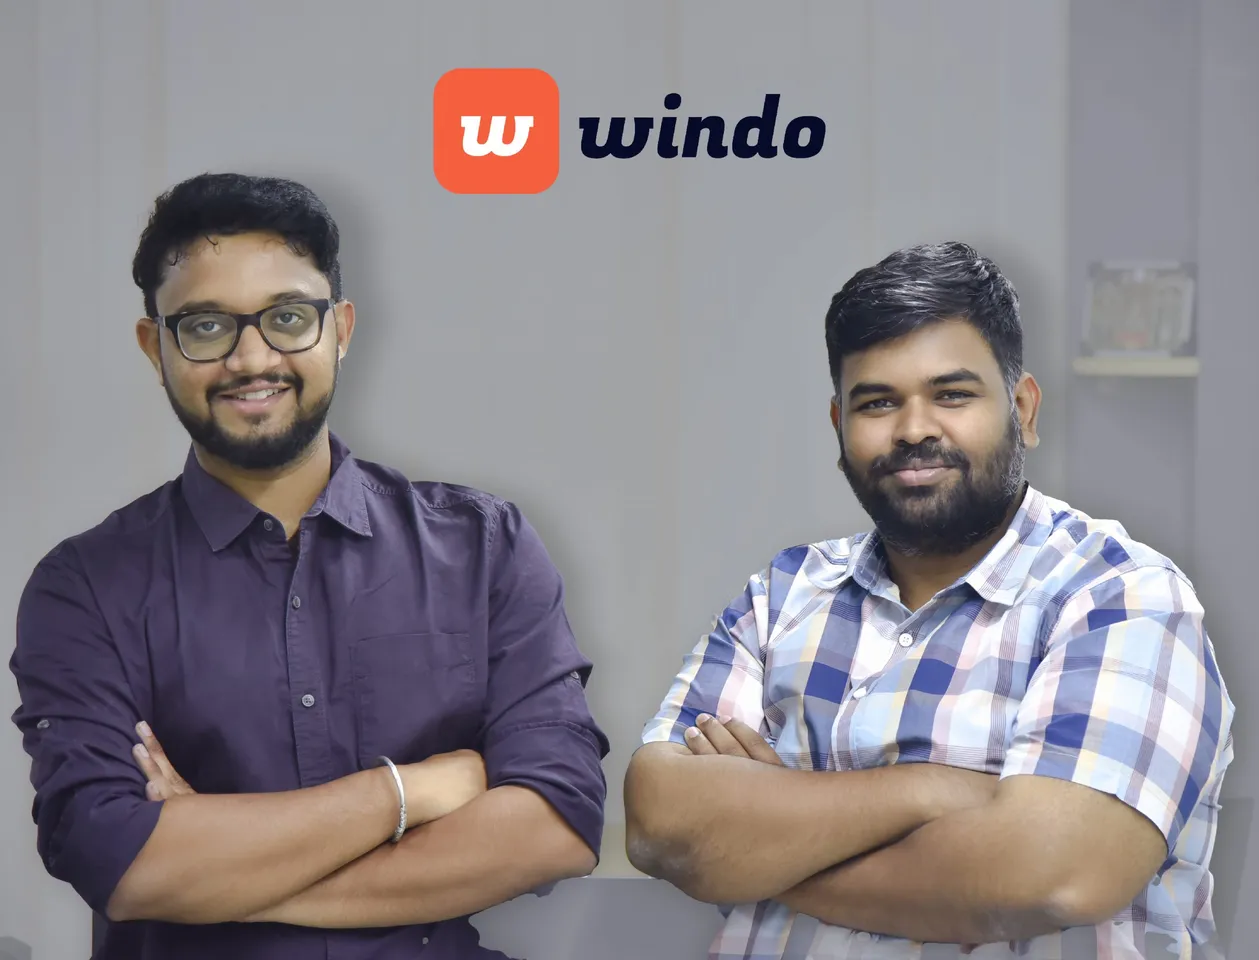 Social Commerce Focused Startup Windo Raised $1.5M in Pre-Series A Round